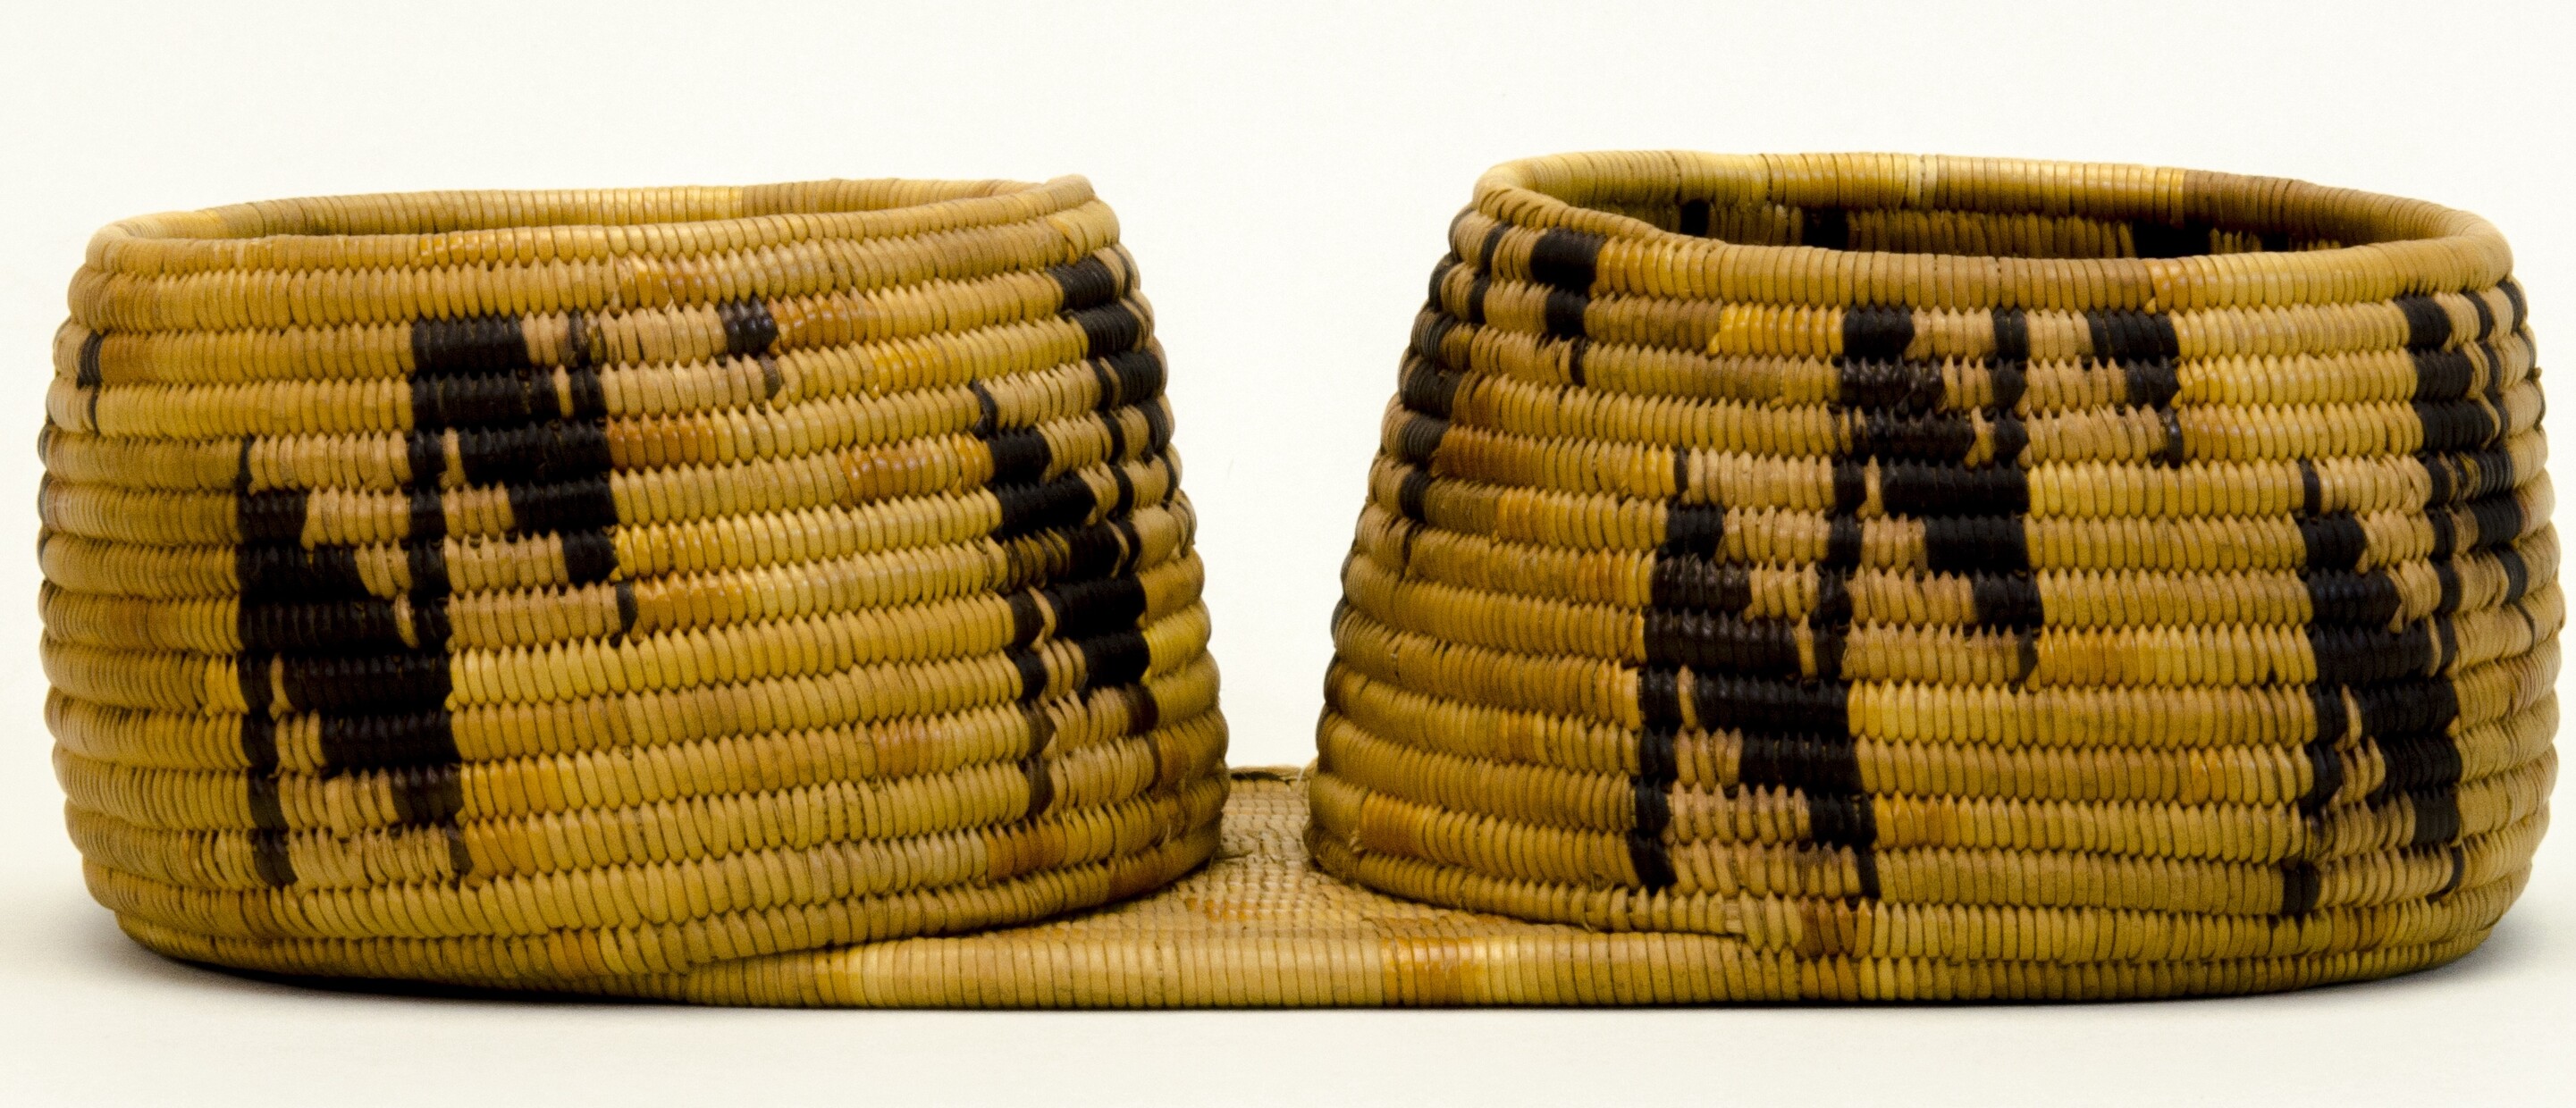 Two restricted hemispherical baskets sharing a common flat base. Coiled construction. Black zigzags on buff.